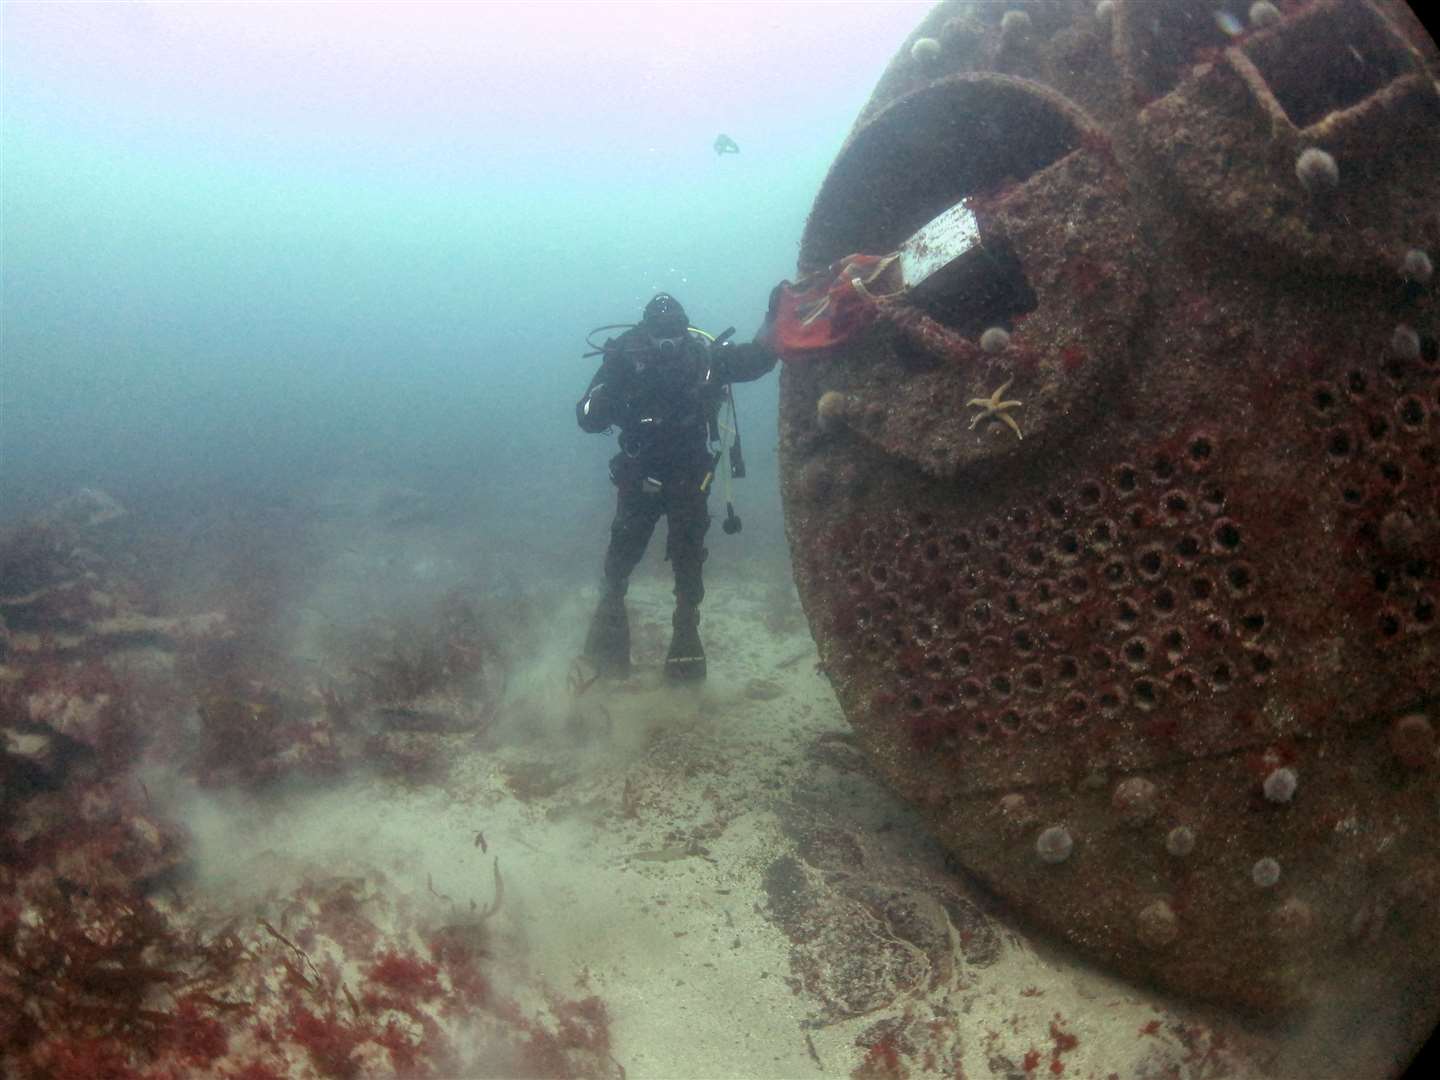 Diver beside the boiler of the Isleford, an RFA ammunition ship wrecked in Wick Bay during the war. The Red Ensign and plaque were placed by local divers in memory of the crew who were all lost.